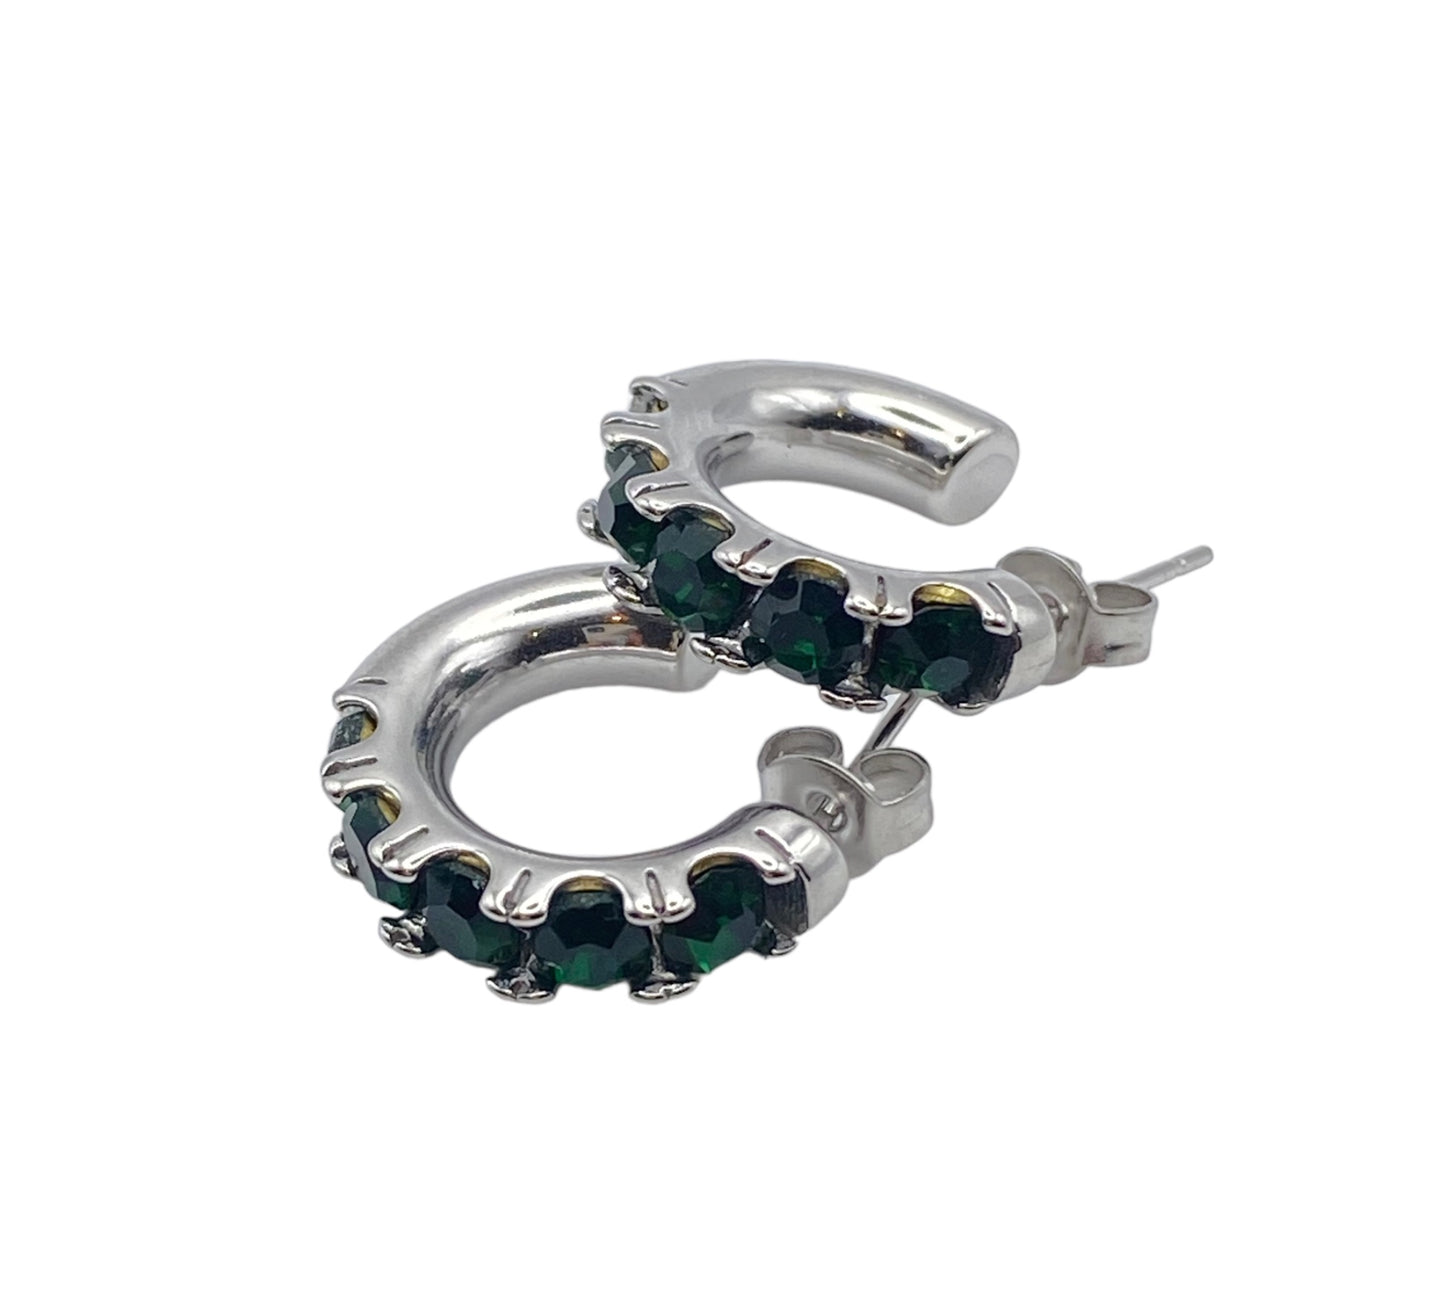 "HESTIA" silver colored open hoops with emerald green zirconia